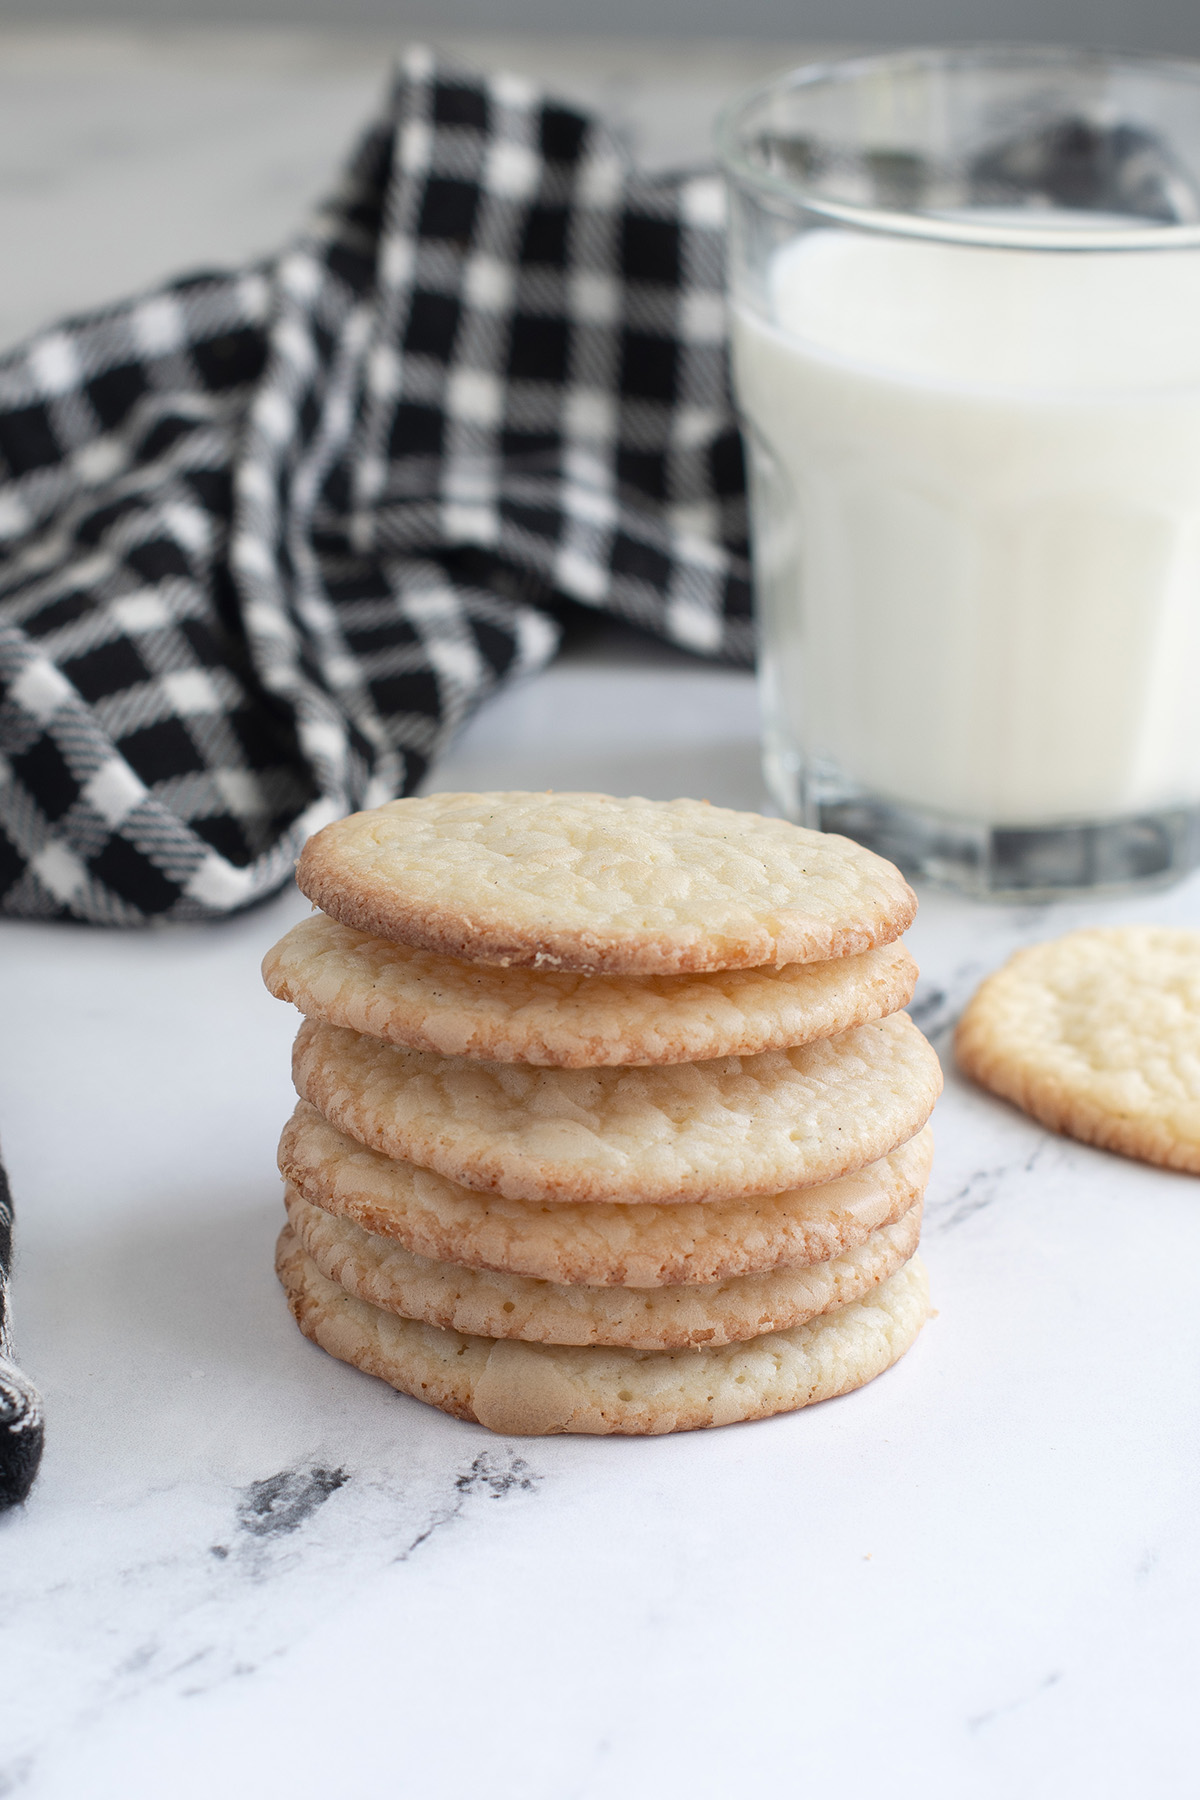 a stack of vanilla wafer cookies and a glass of milk.